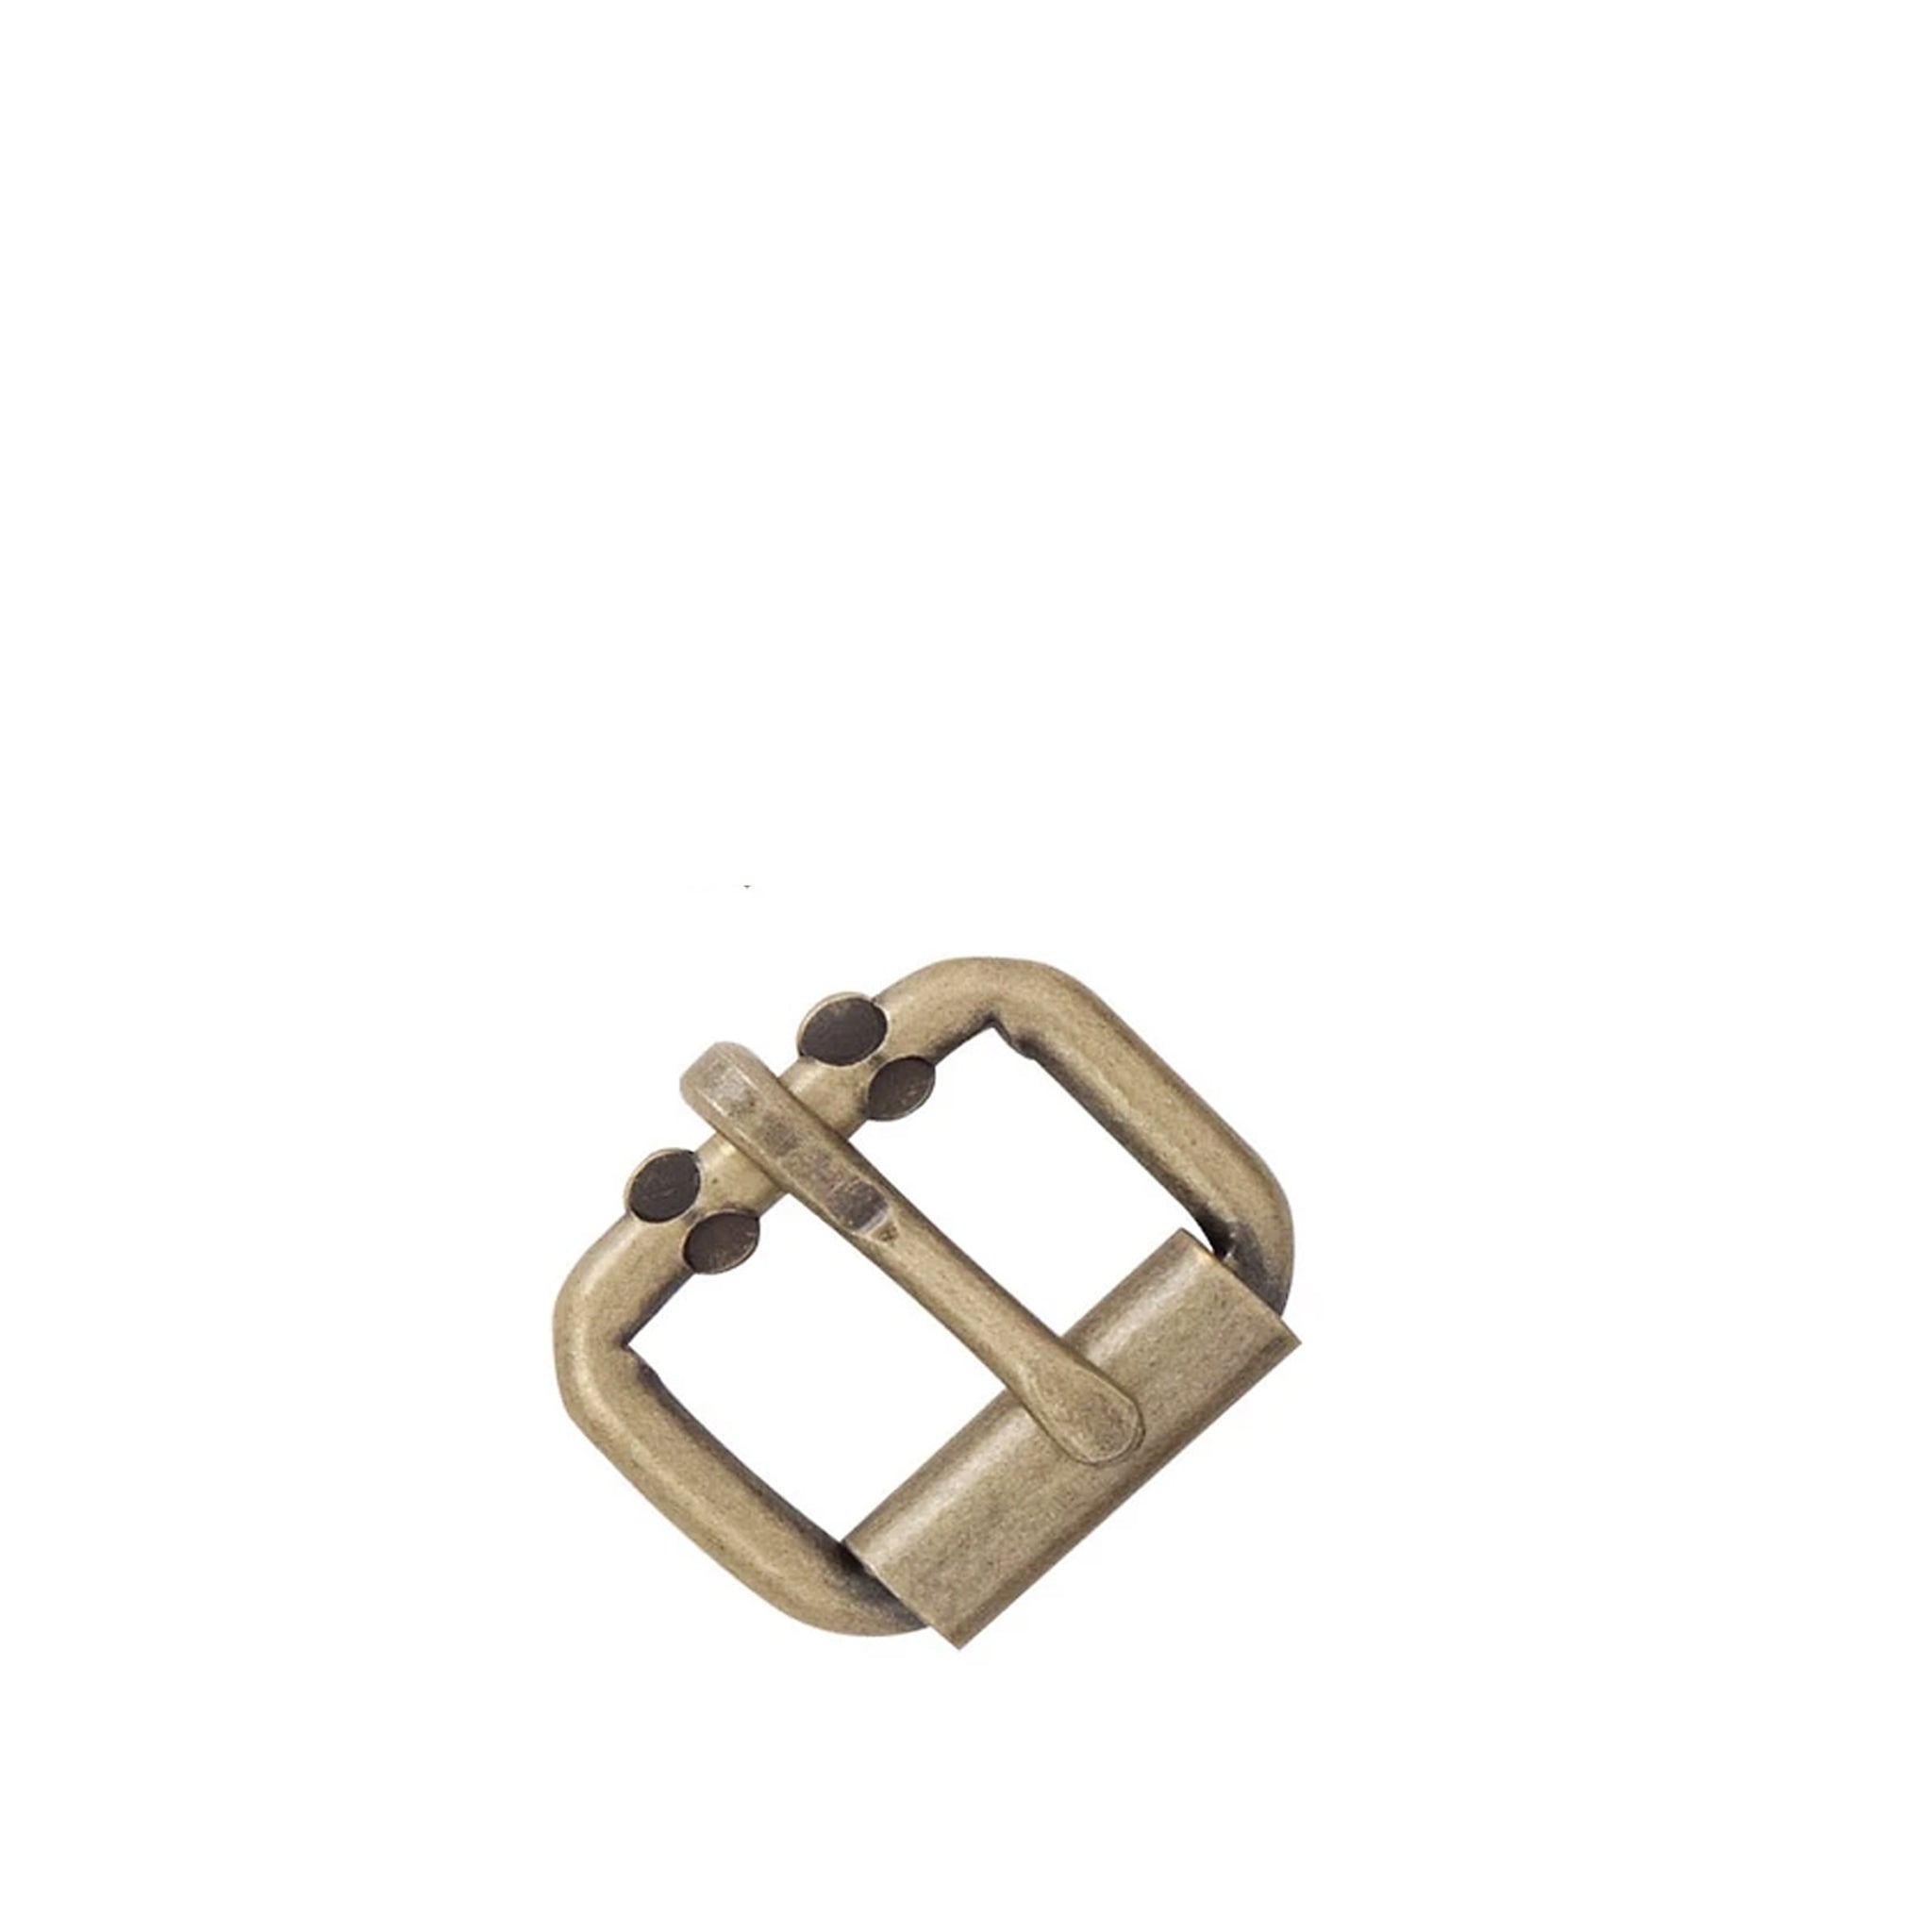 51mm Single Prong Roller Buckle - Antique Brass from Identity Leathercraft